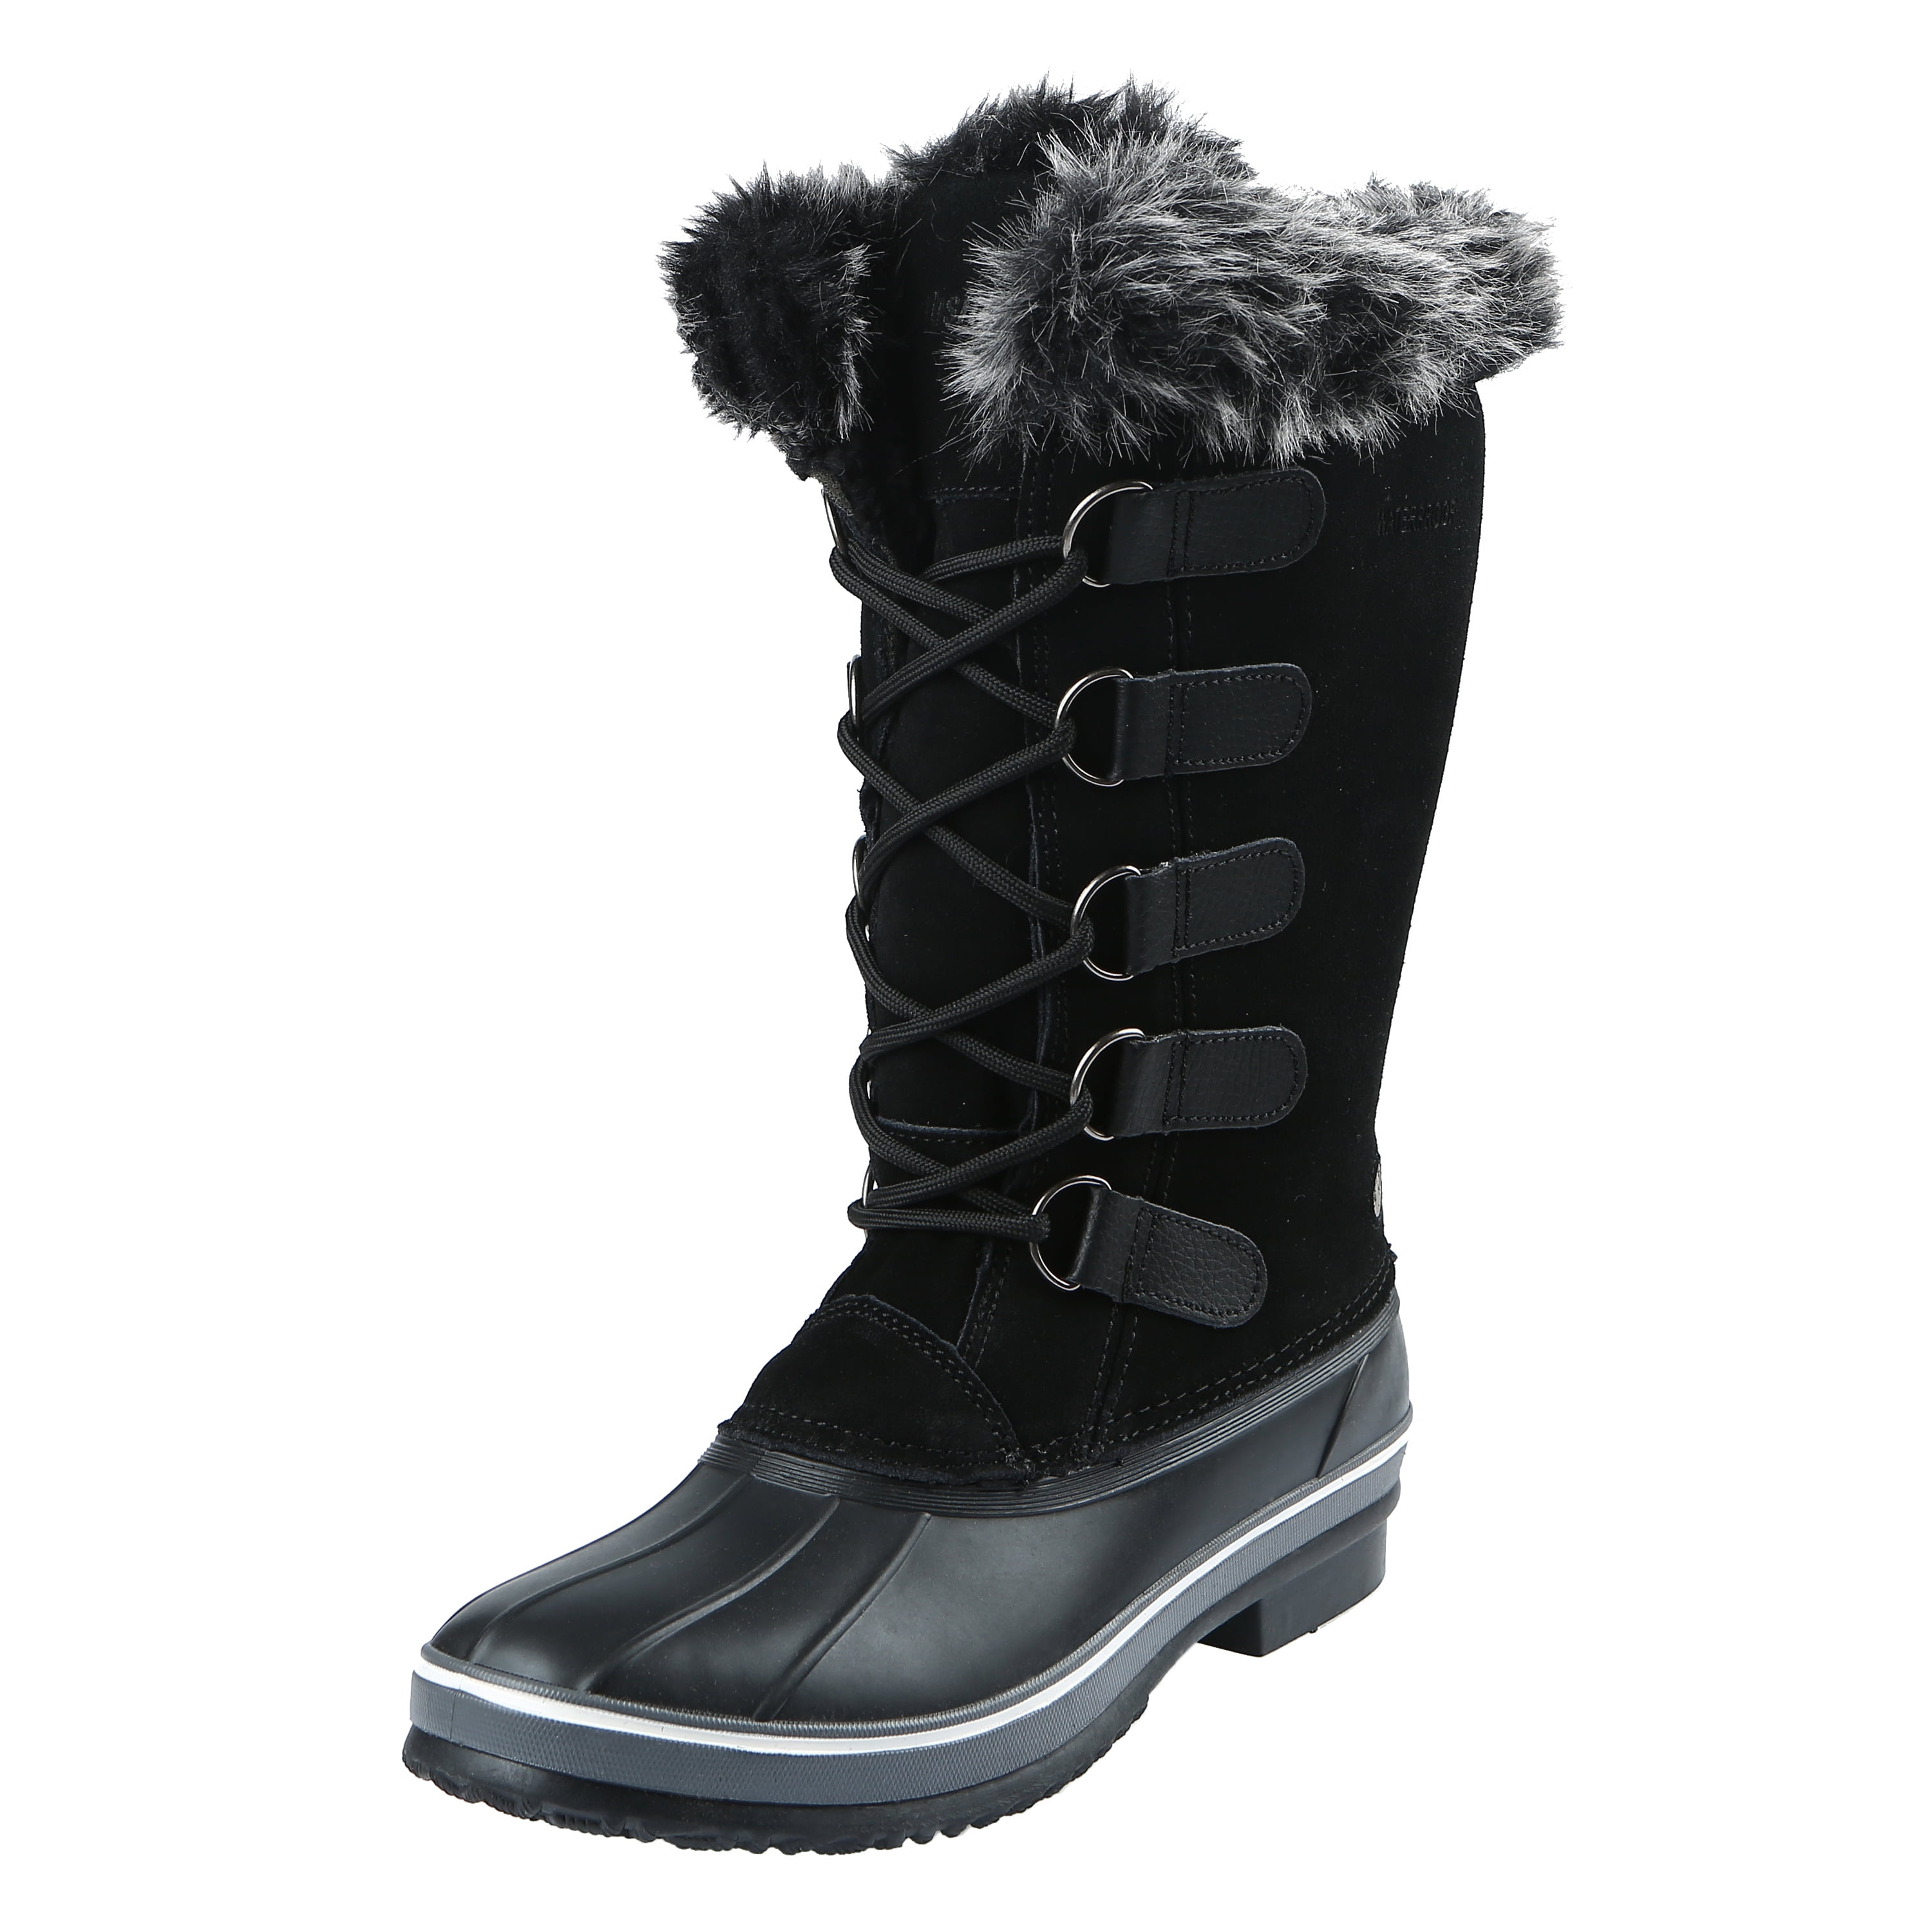 Thermal snow boots for women - Eatlocalnz